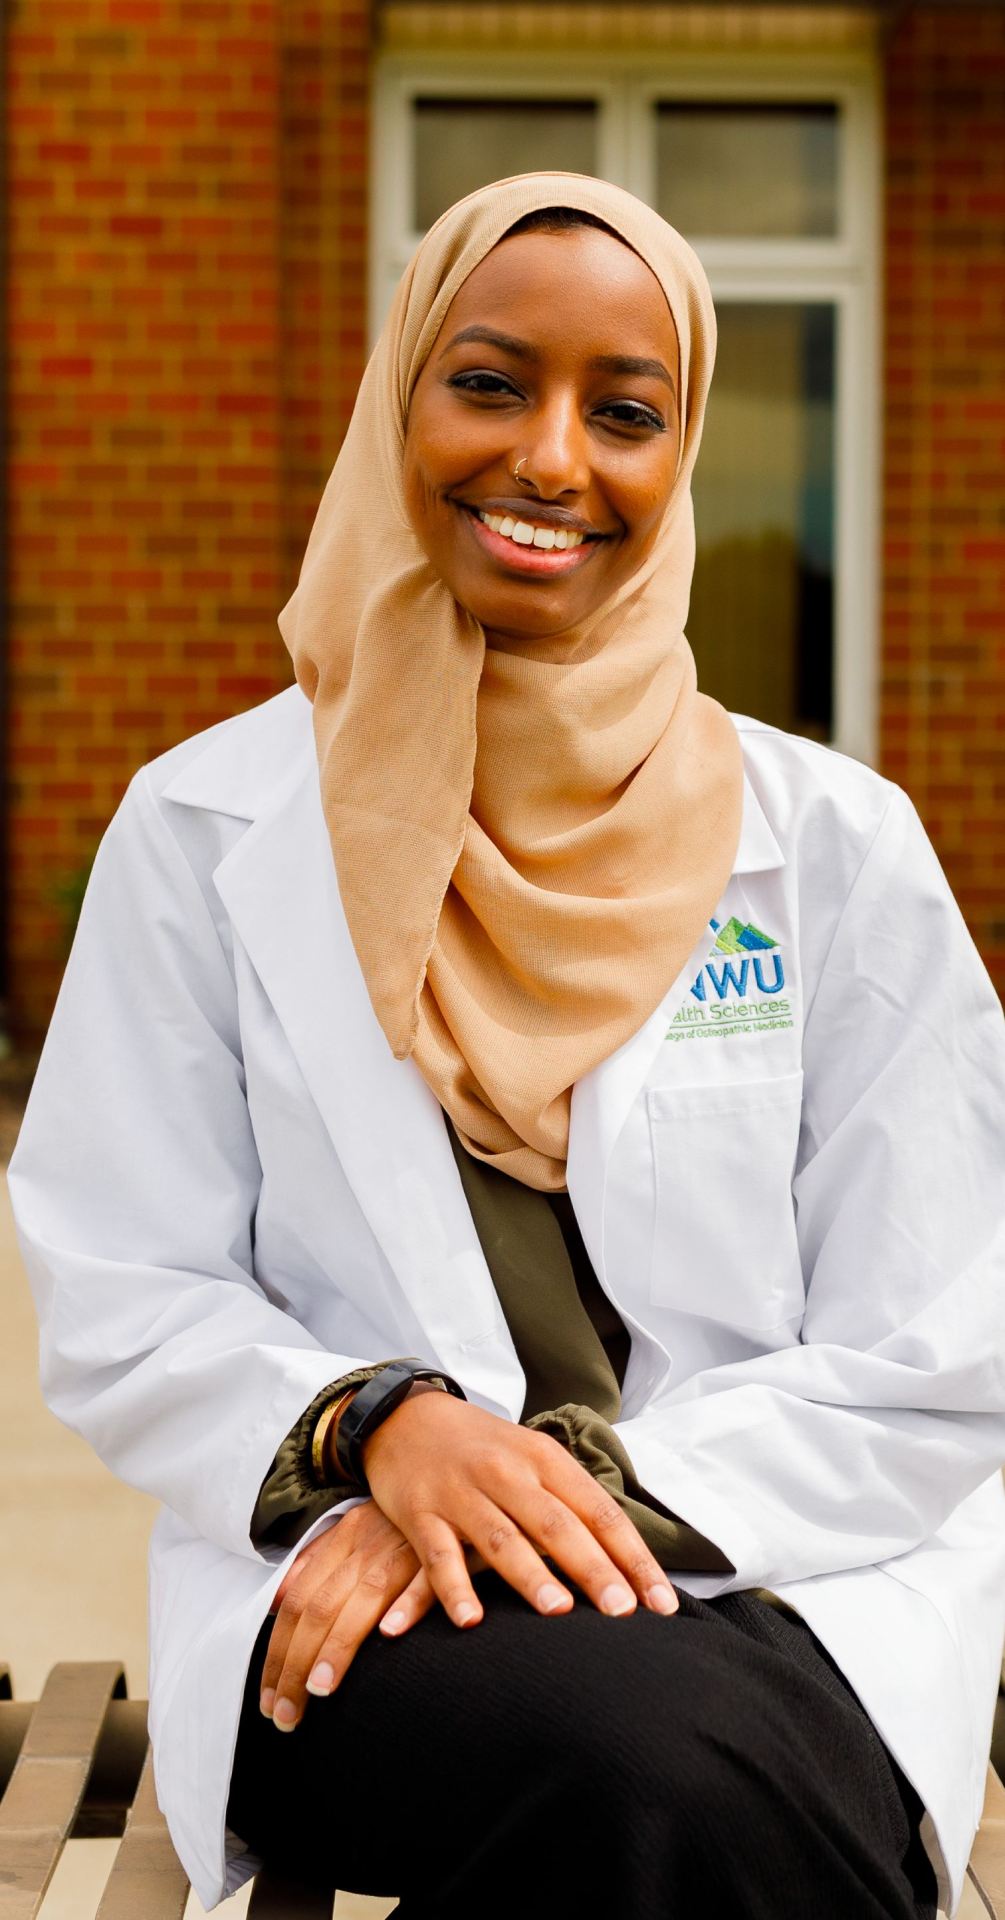 PNWU Doctor of Ostepathic Medicine student